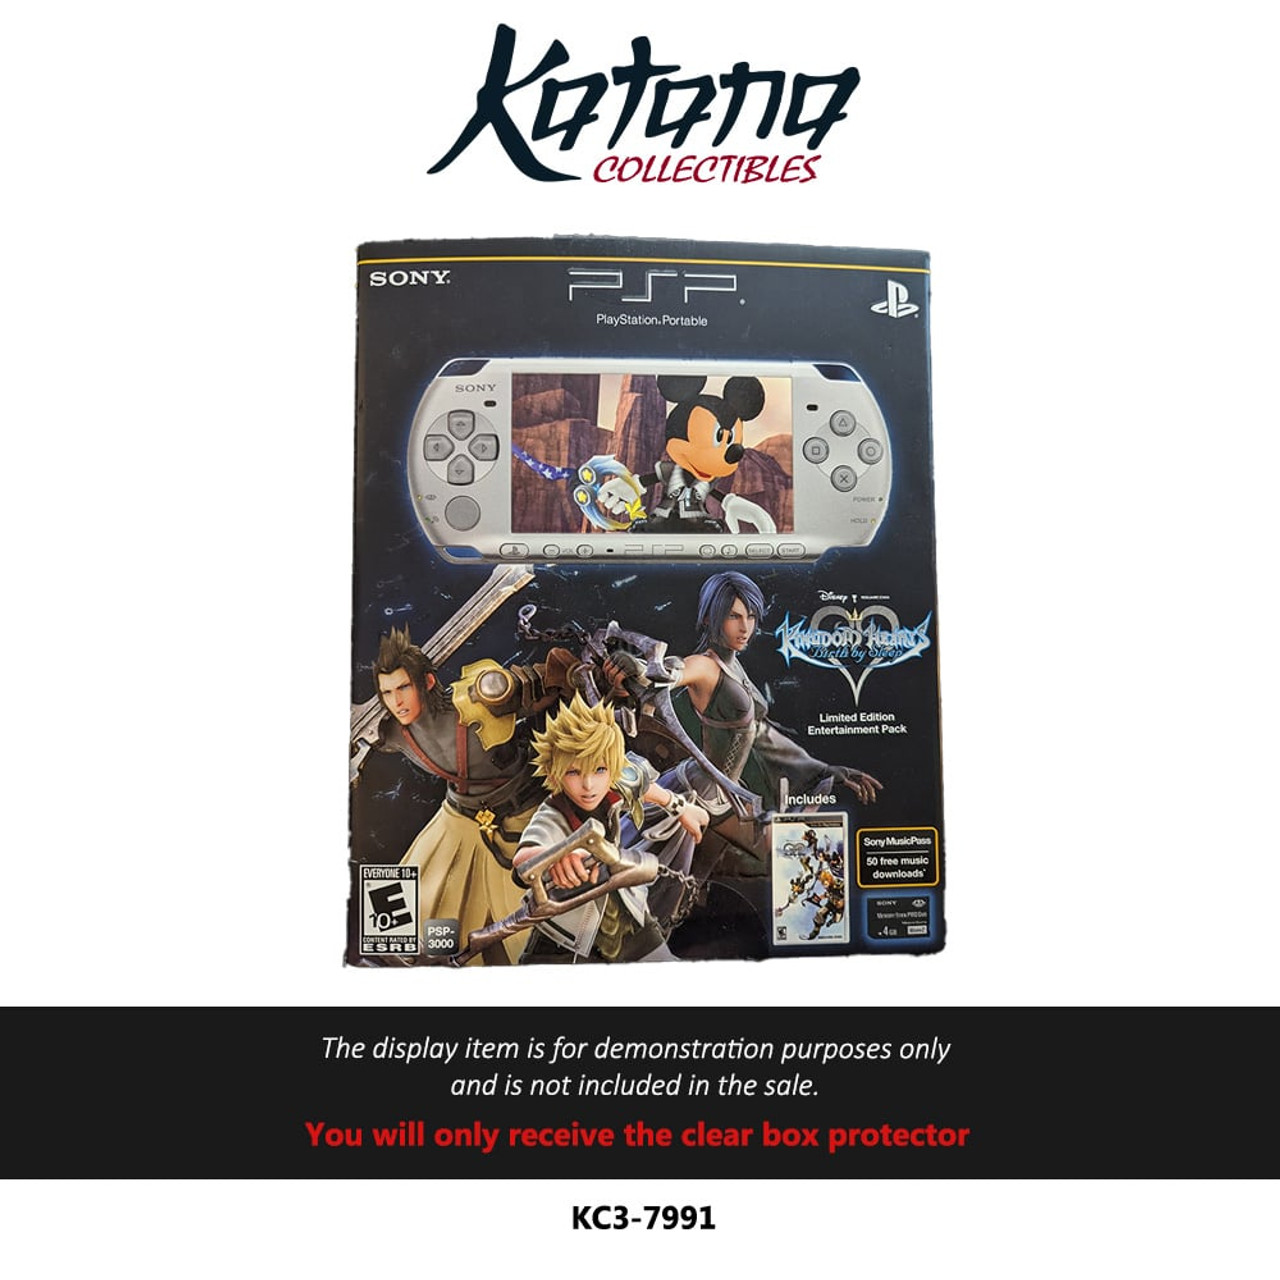 Katana Collectibles Protector For PSP-3000 Kingdom Hearts Birth By Sleep Limited Edition Entertainment Pack